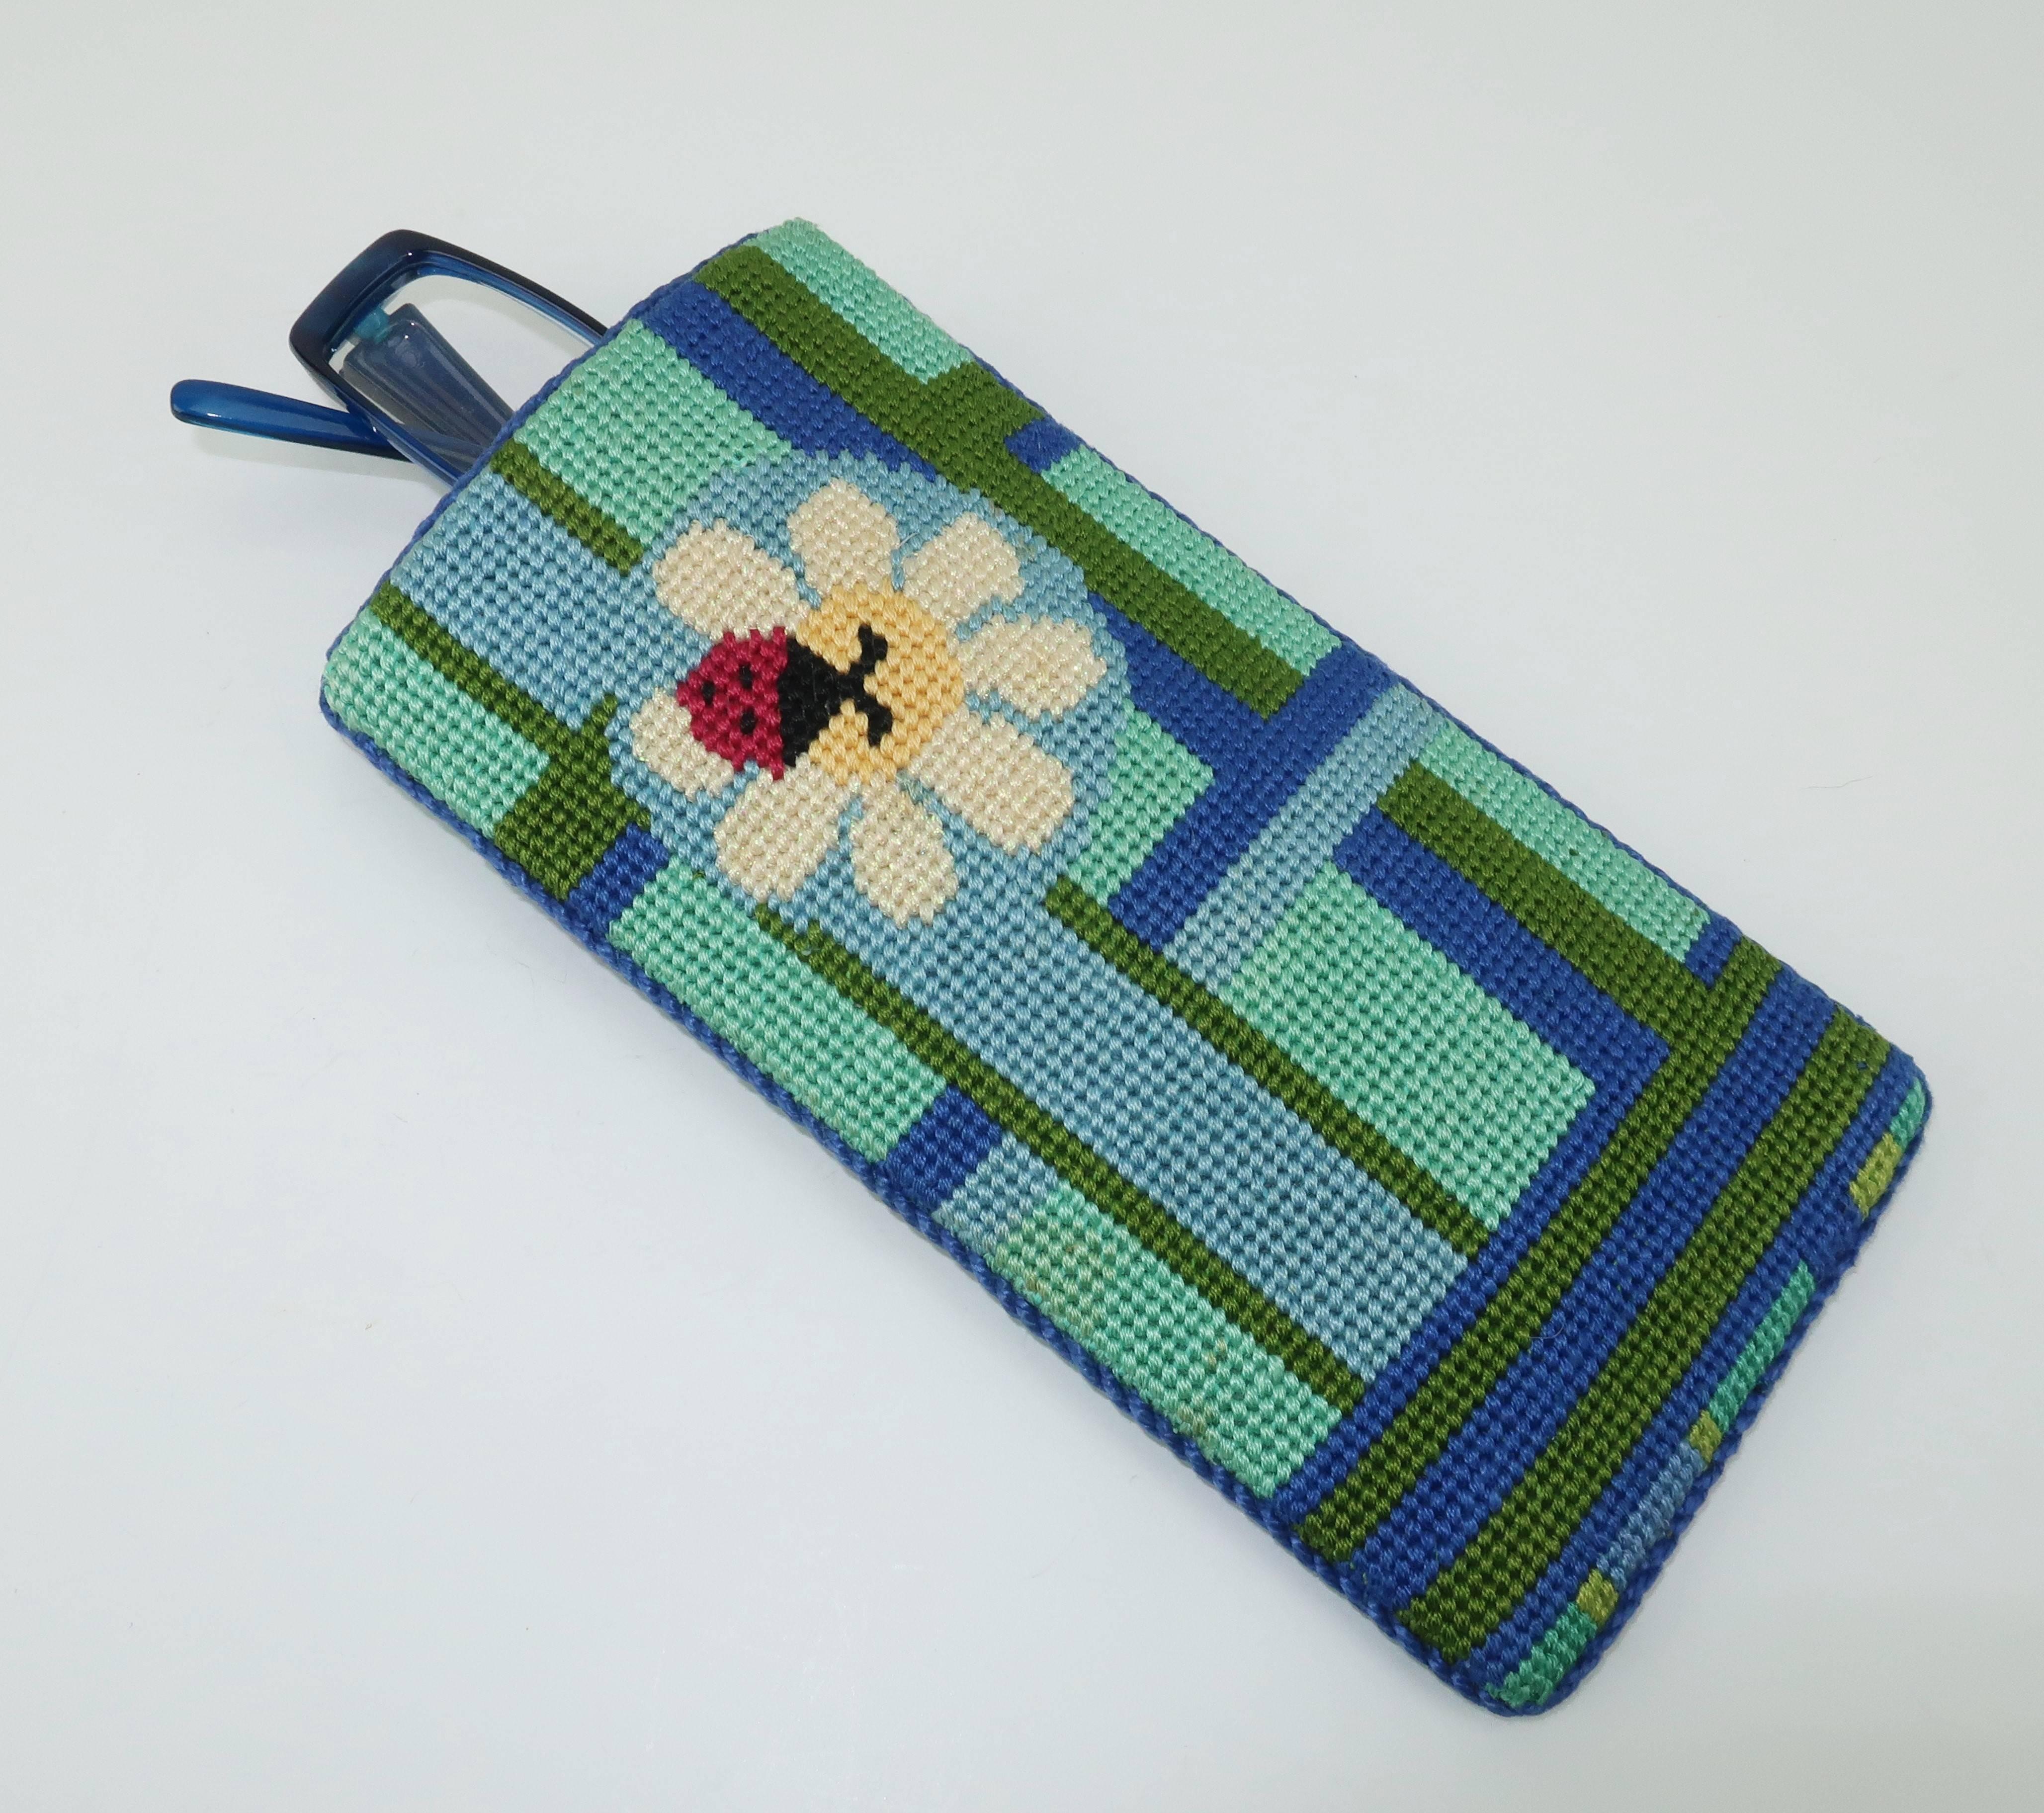 This lucky little ladybug has landed on a wonderfully graphic blue, green and turquoise needlepoint eyeglasses case.  Both sides are fully decorated with pearly metallic threading on the flowers and blue silk cording on the edges.  The inside is